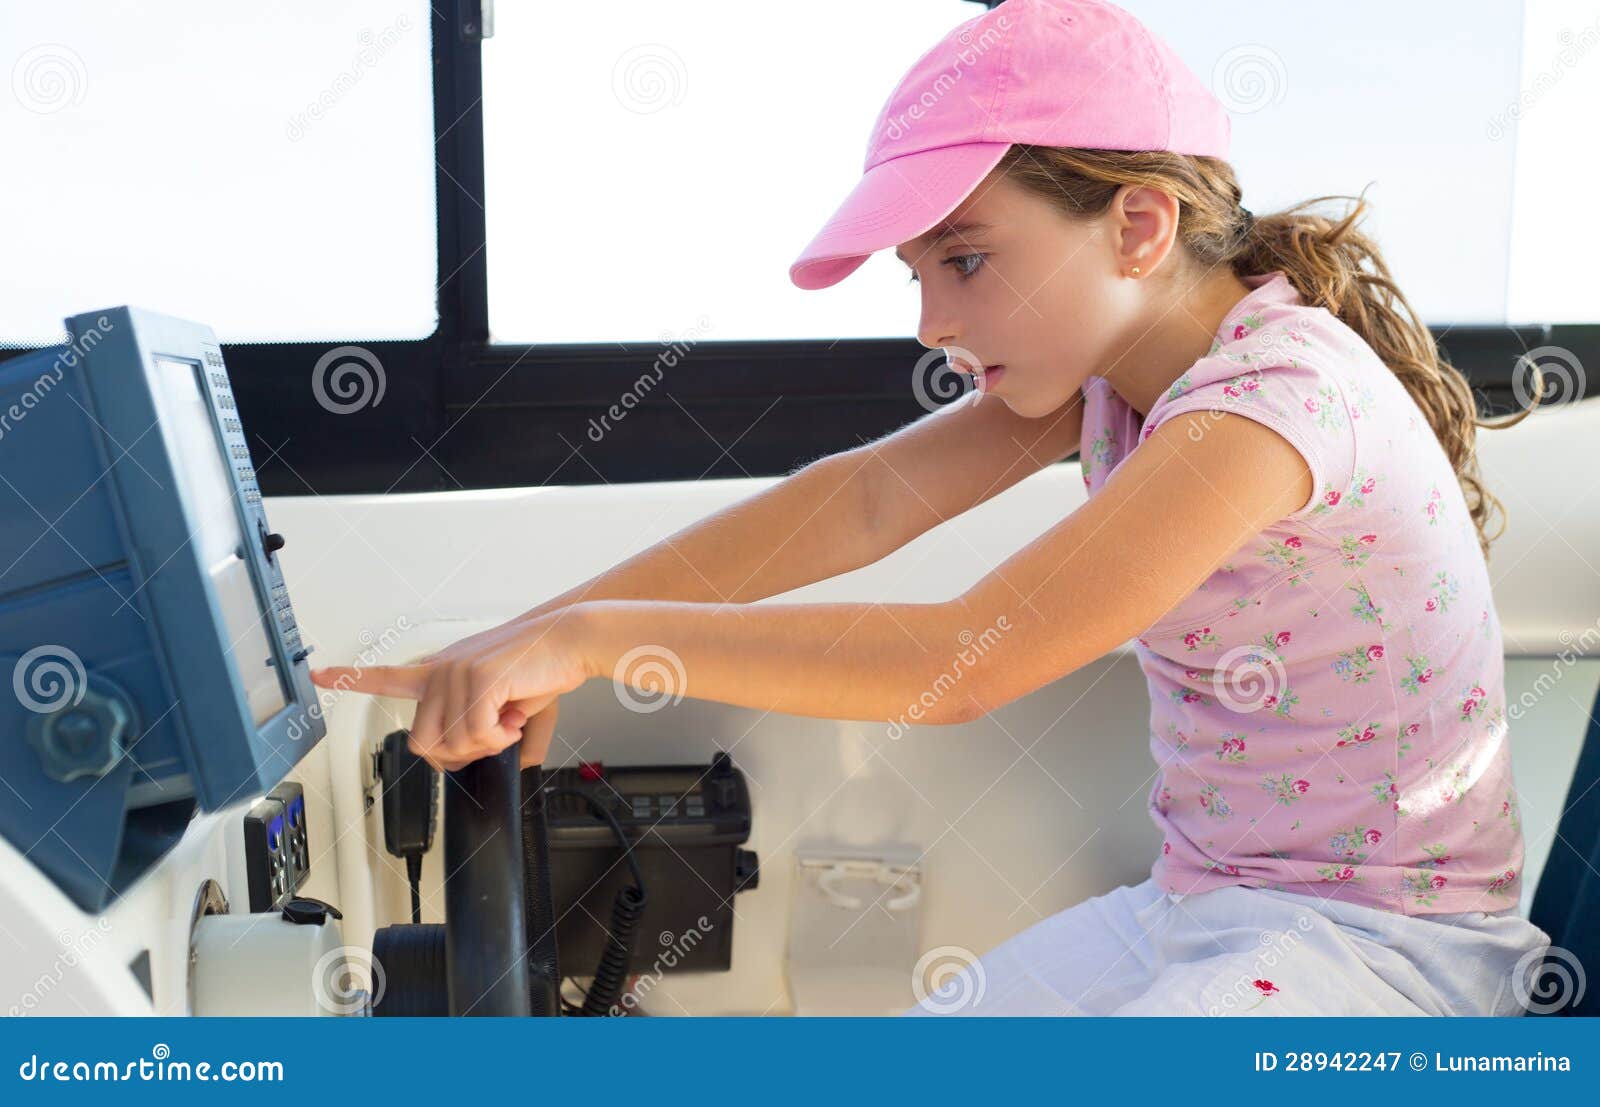 Child Girl Sailing Steering The Boat Wheel Stock Image - Image of